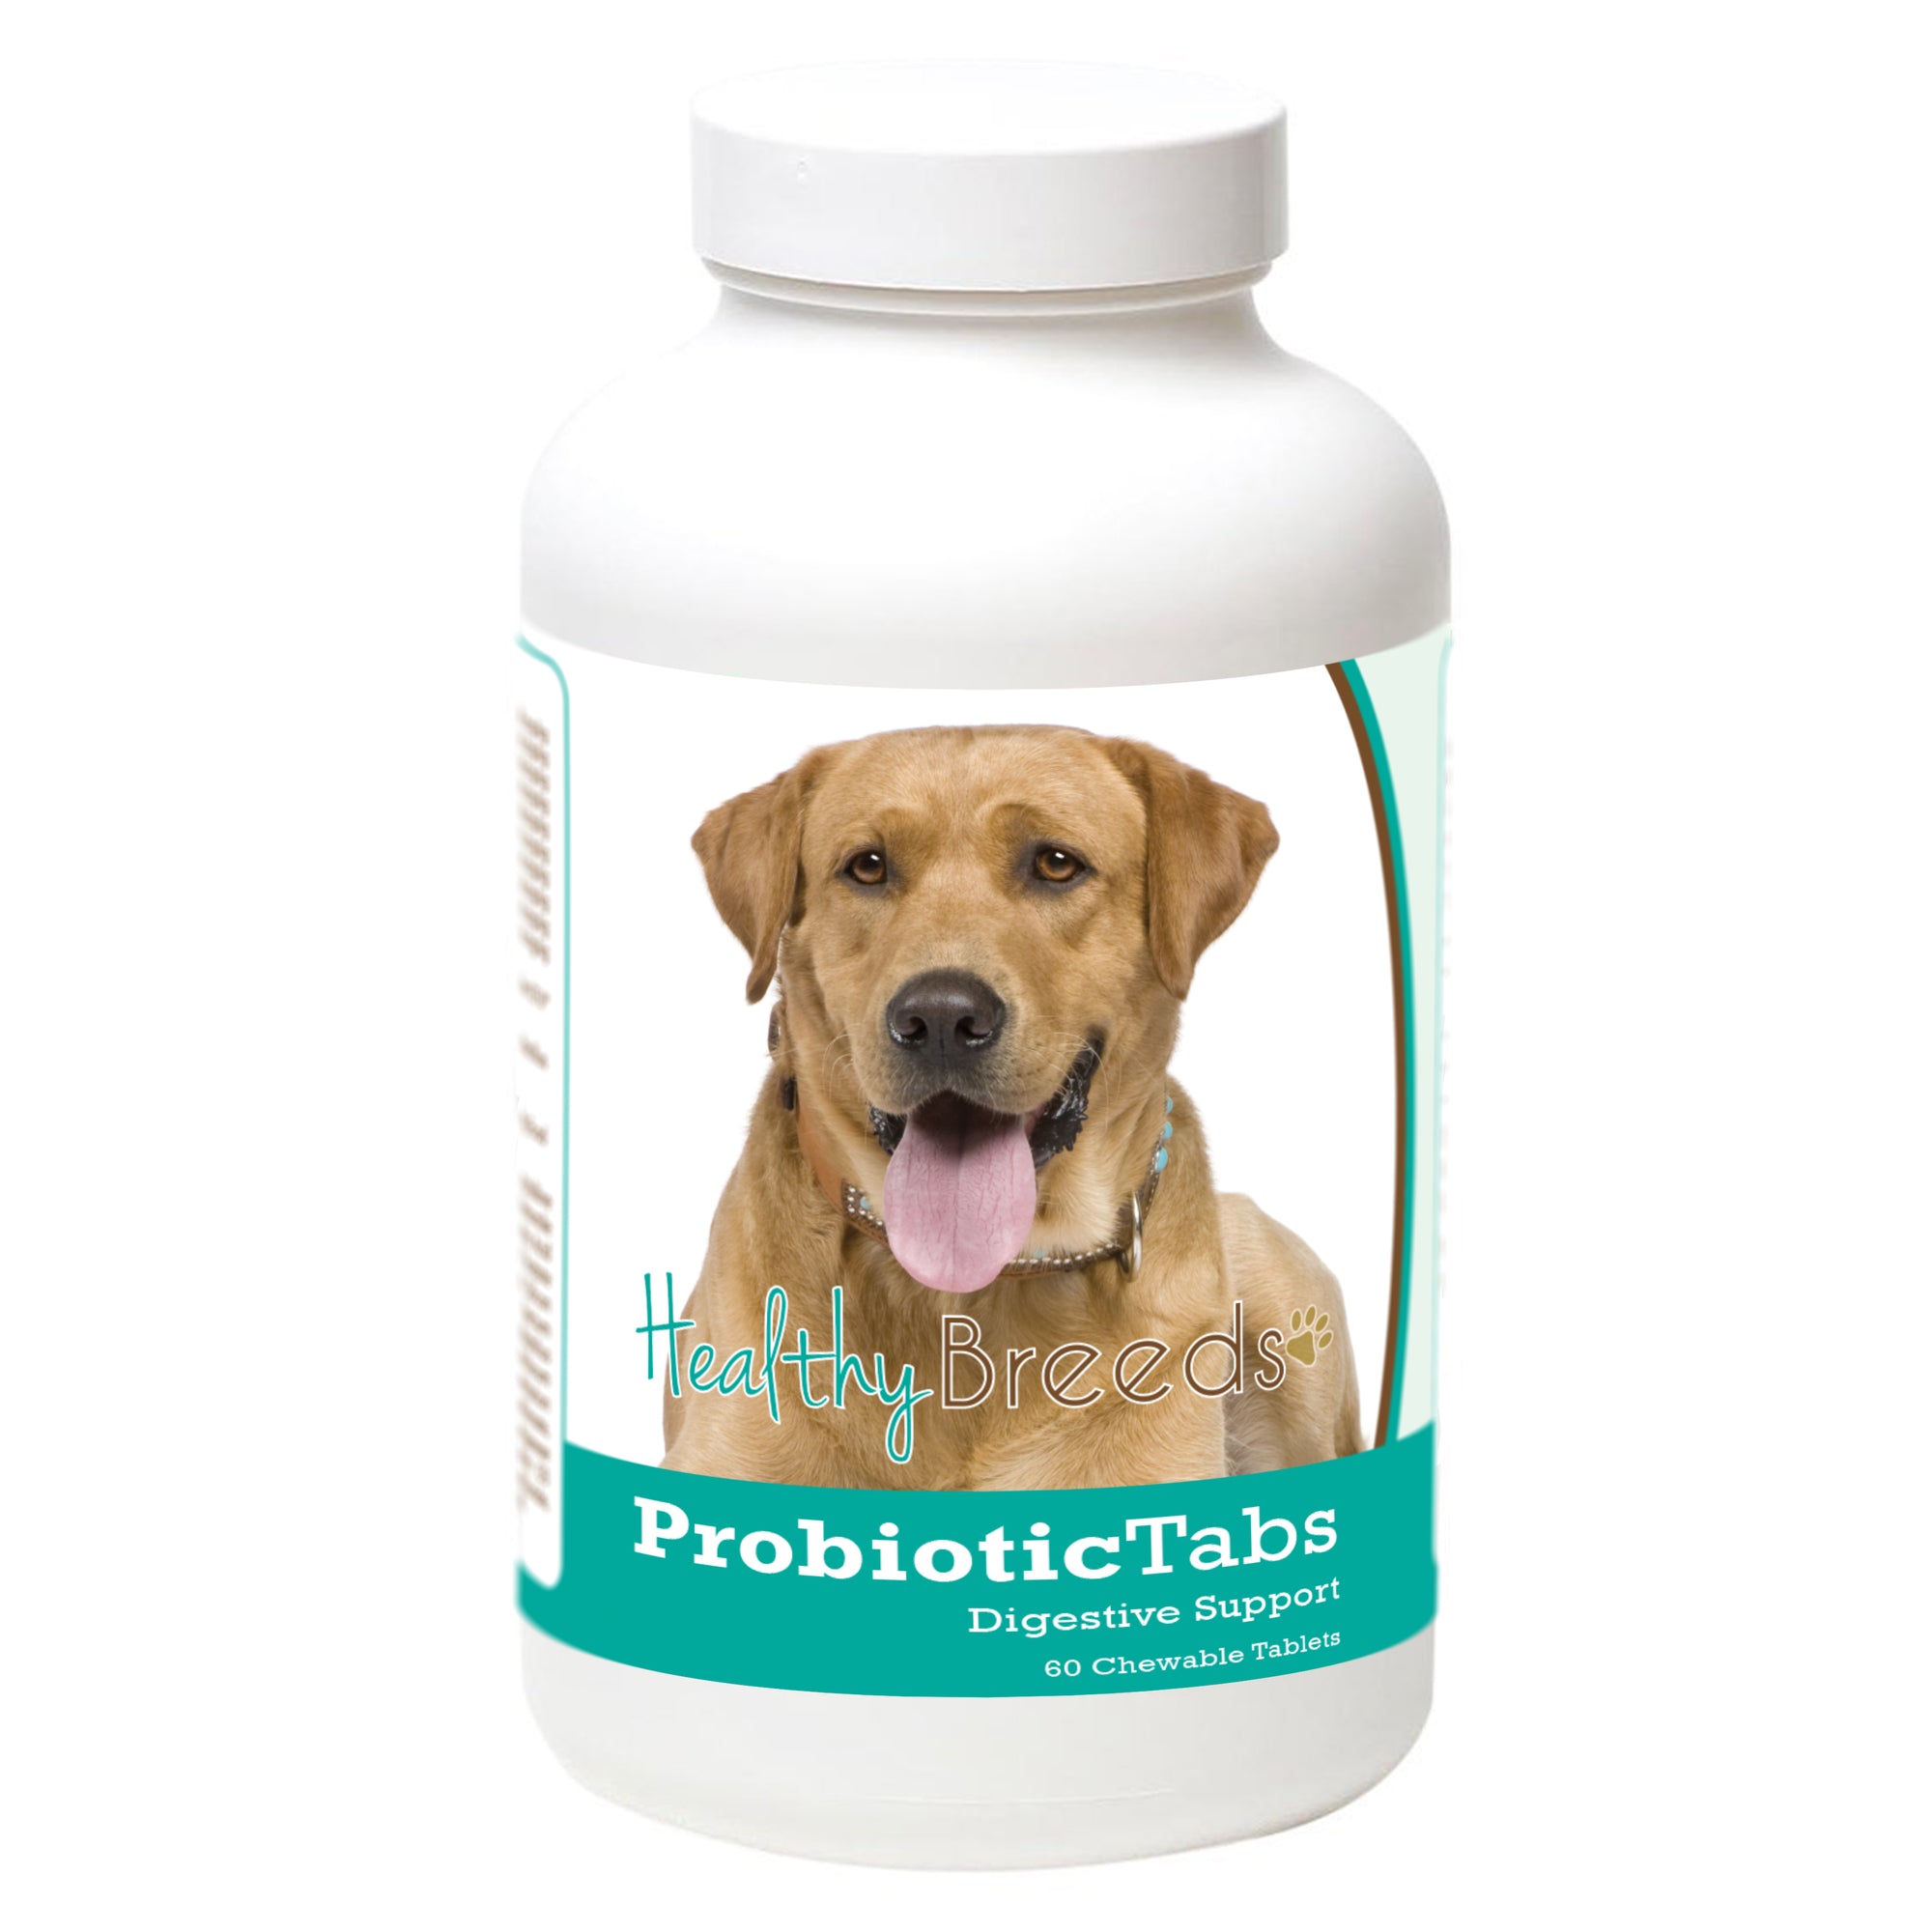 Healthy Breeds Labrador Retriever Probiotic and Digestive Support for Dogs 60 Count